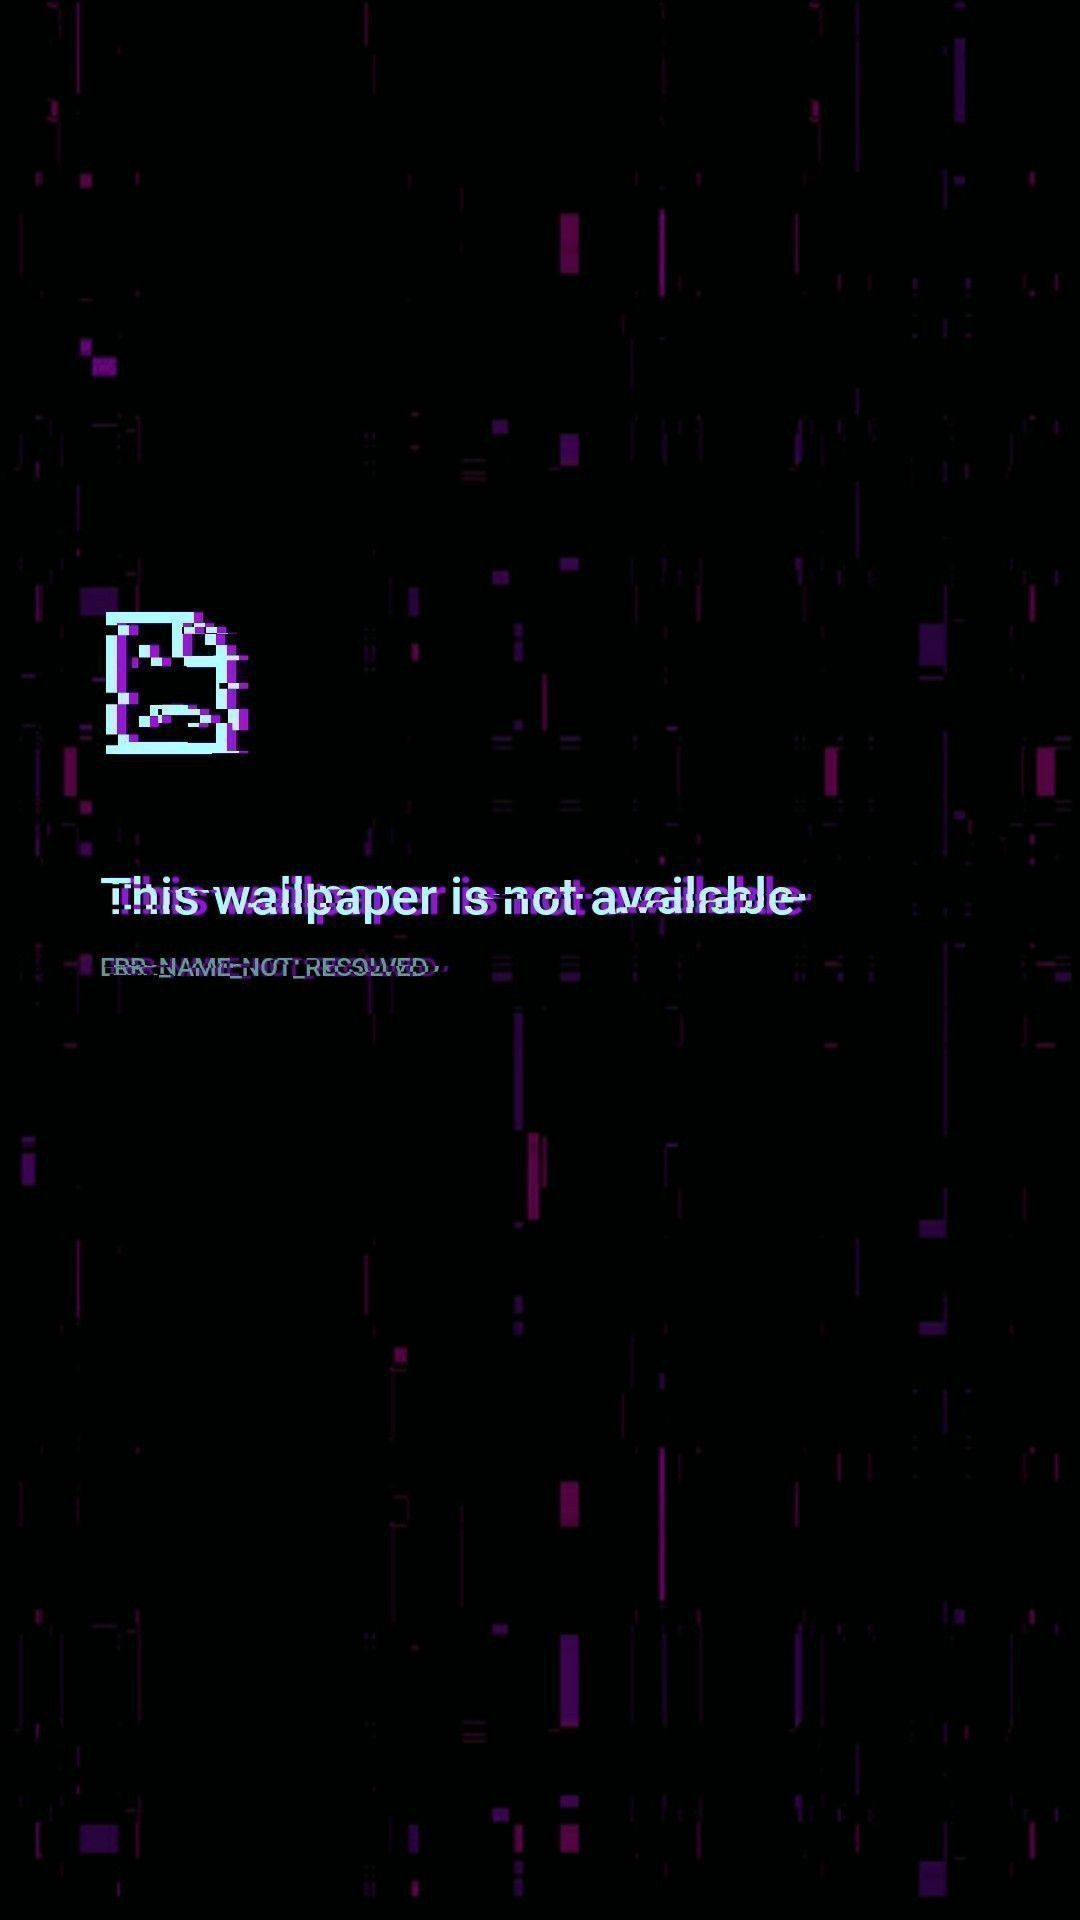 This wallpaper is not available Line names not received - Dark vaporwave, glitch